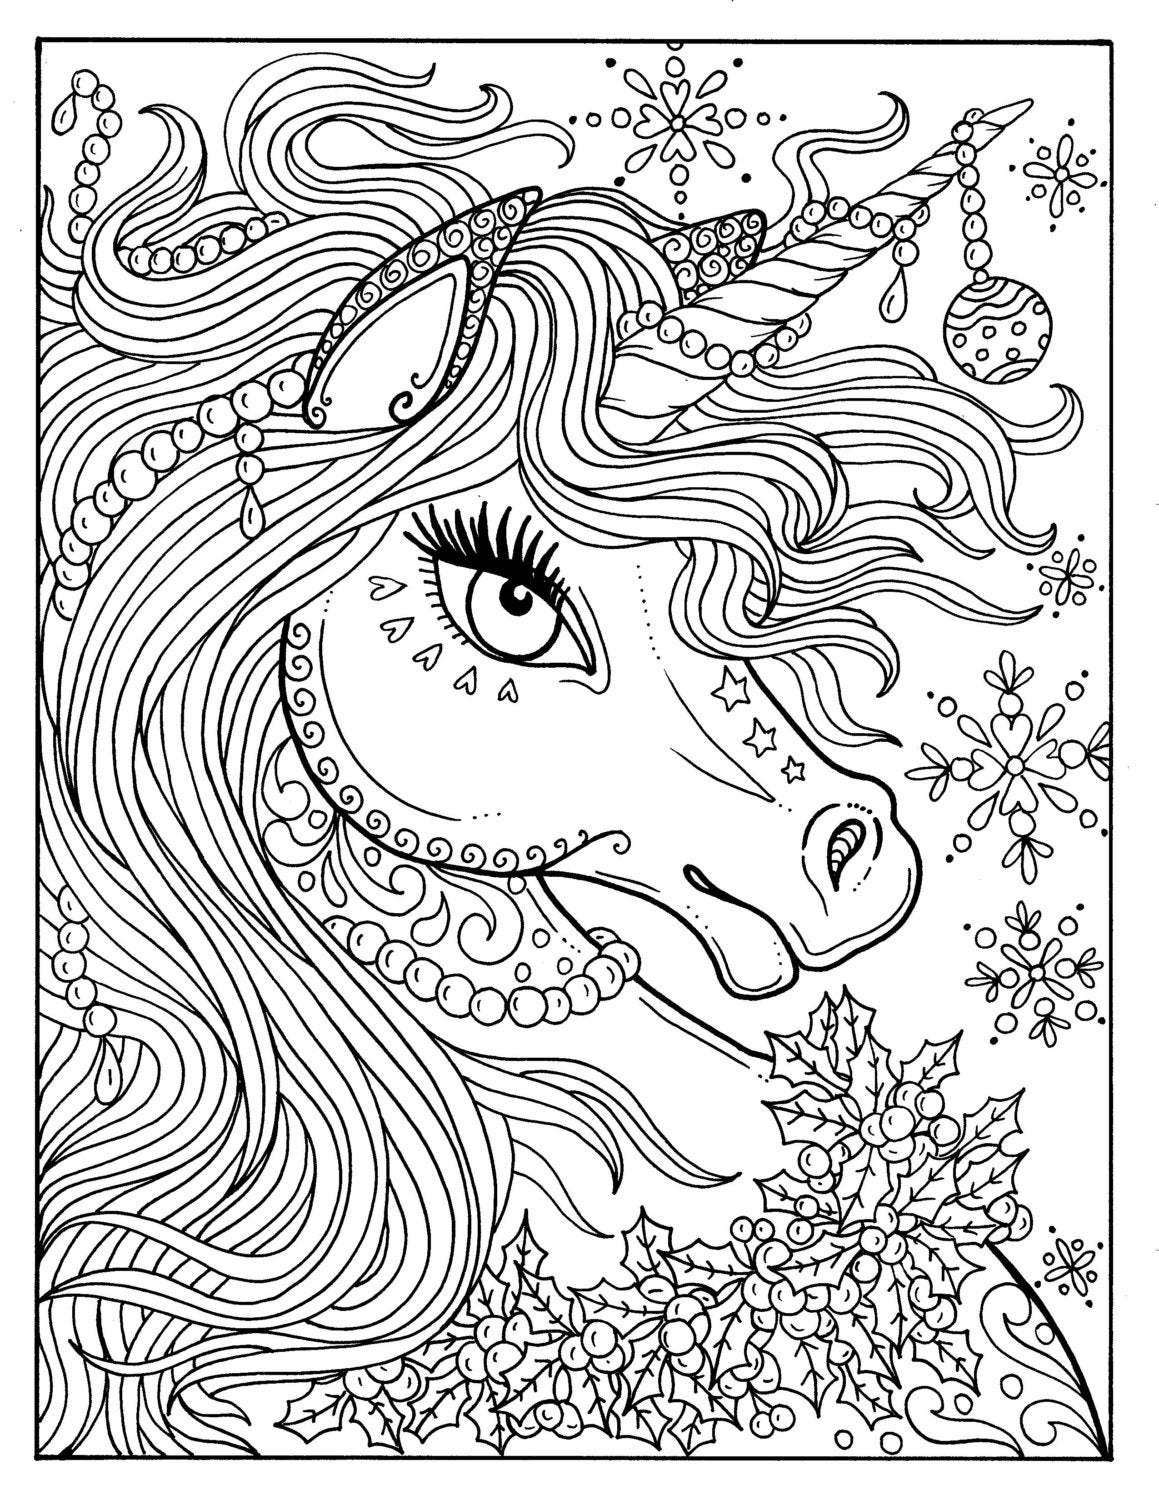 Christmas Unicorn Coloring Pages